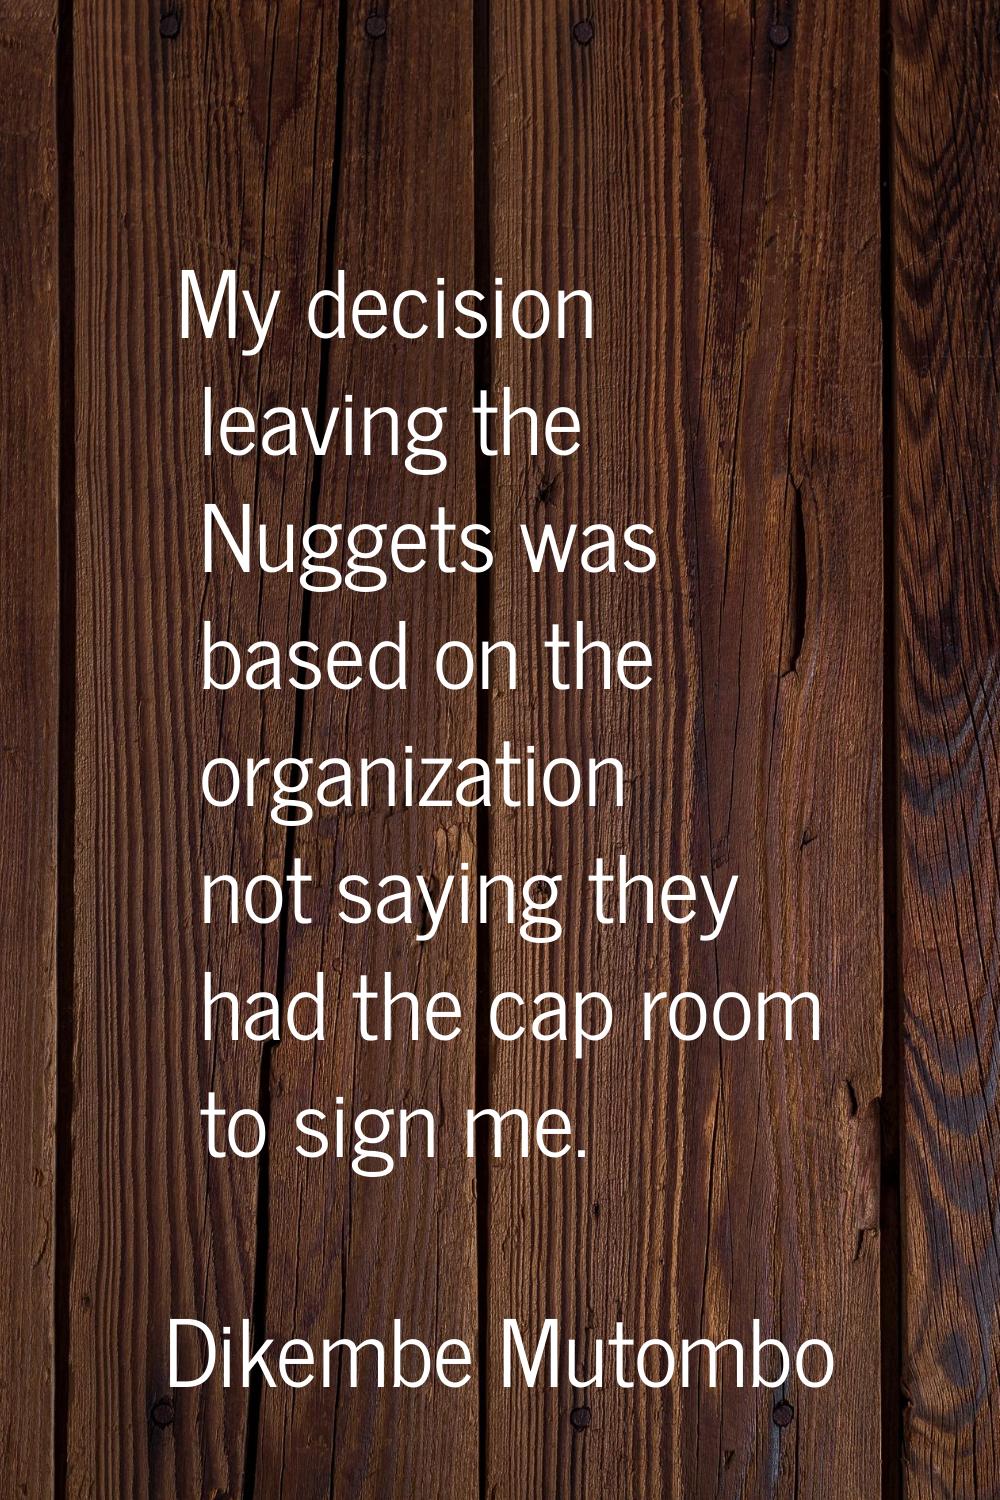 My decision leaving the Nuggets was based on the organization not saying they had the cap room to s